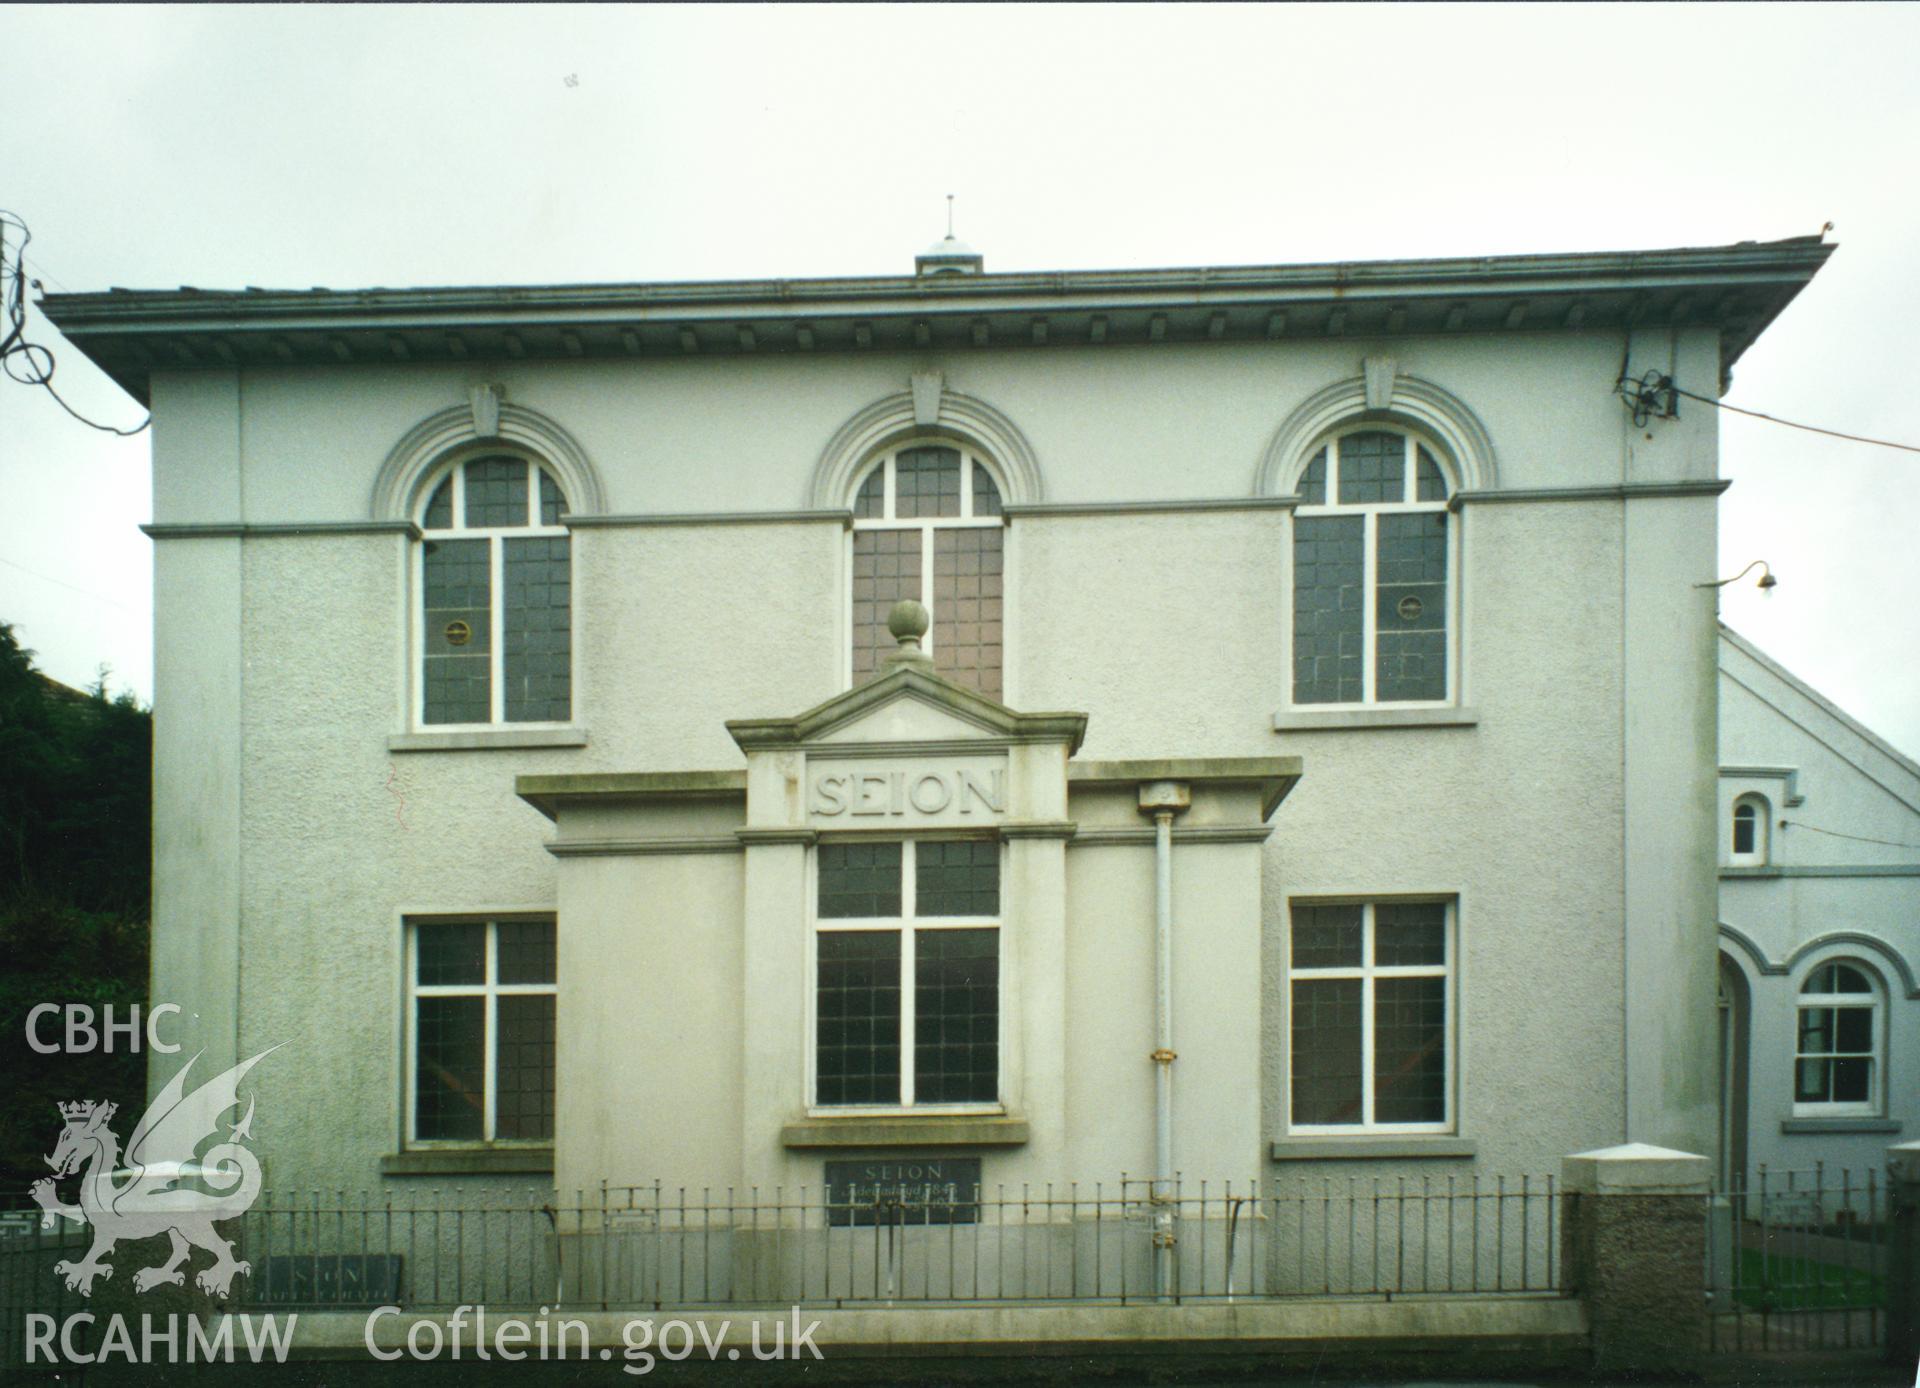 Digital copy of a colour photograph showing an exterior view of Seion Welsh Baptist Chapel, St Clears, taken by Robert Scourfield, 1996.